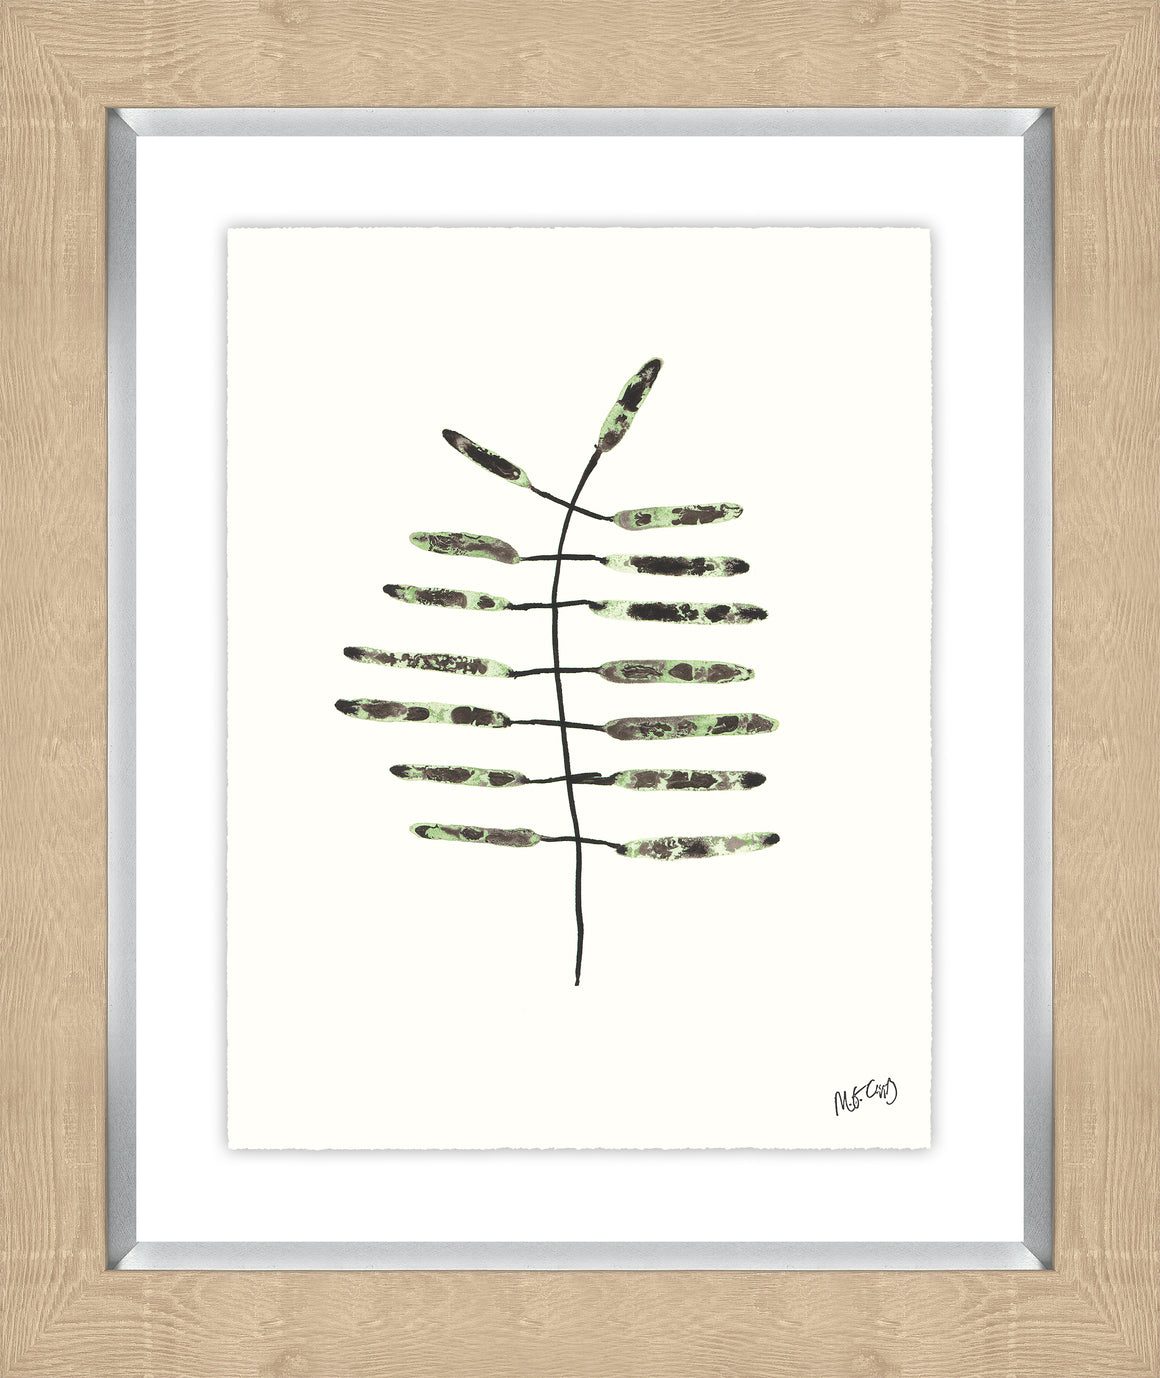 Plant Life XI by M.G. Capps - 16" x 20" Framed